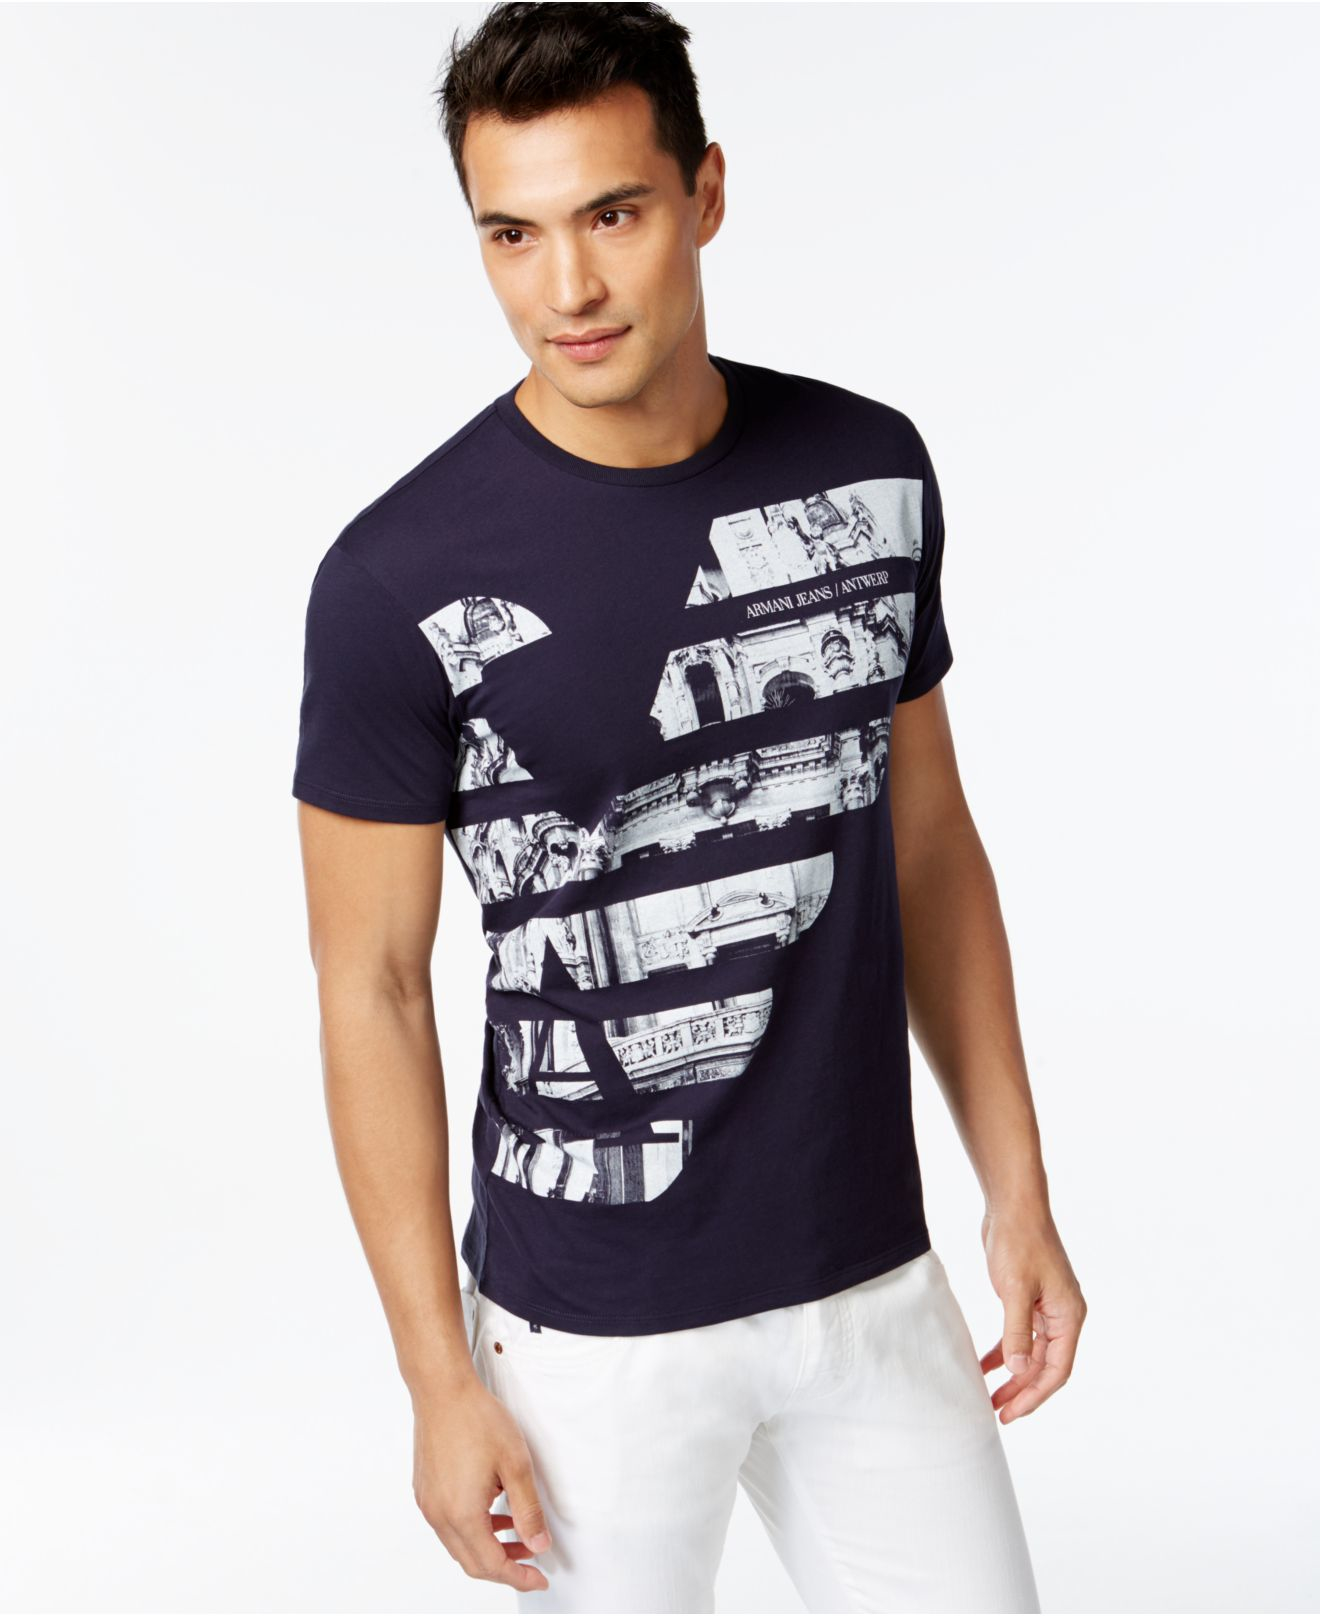 Armani Jeans Miami/new York/tokyo/milano T-shirt in Navy (Blue) for Men -  Lyst